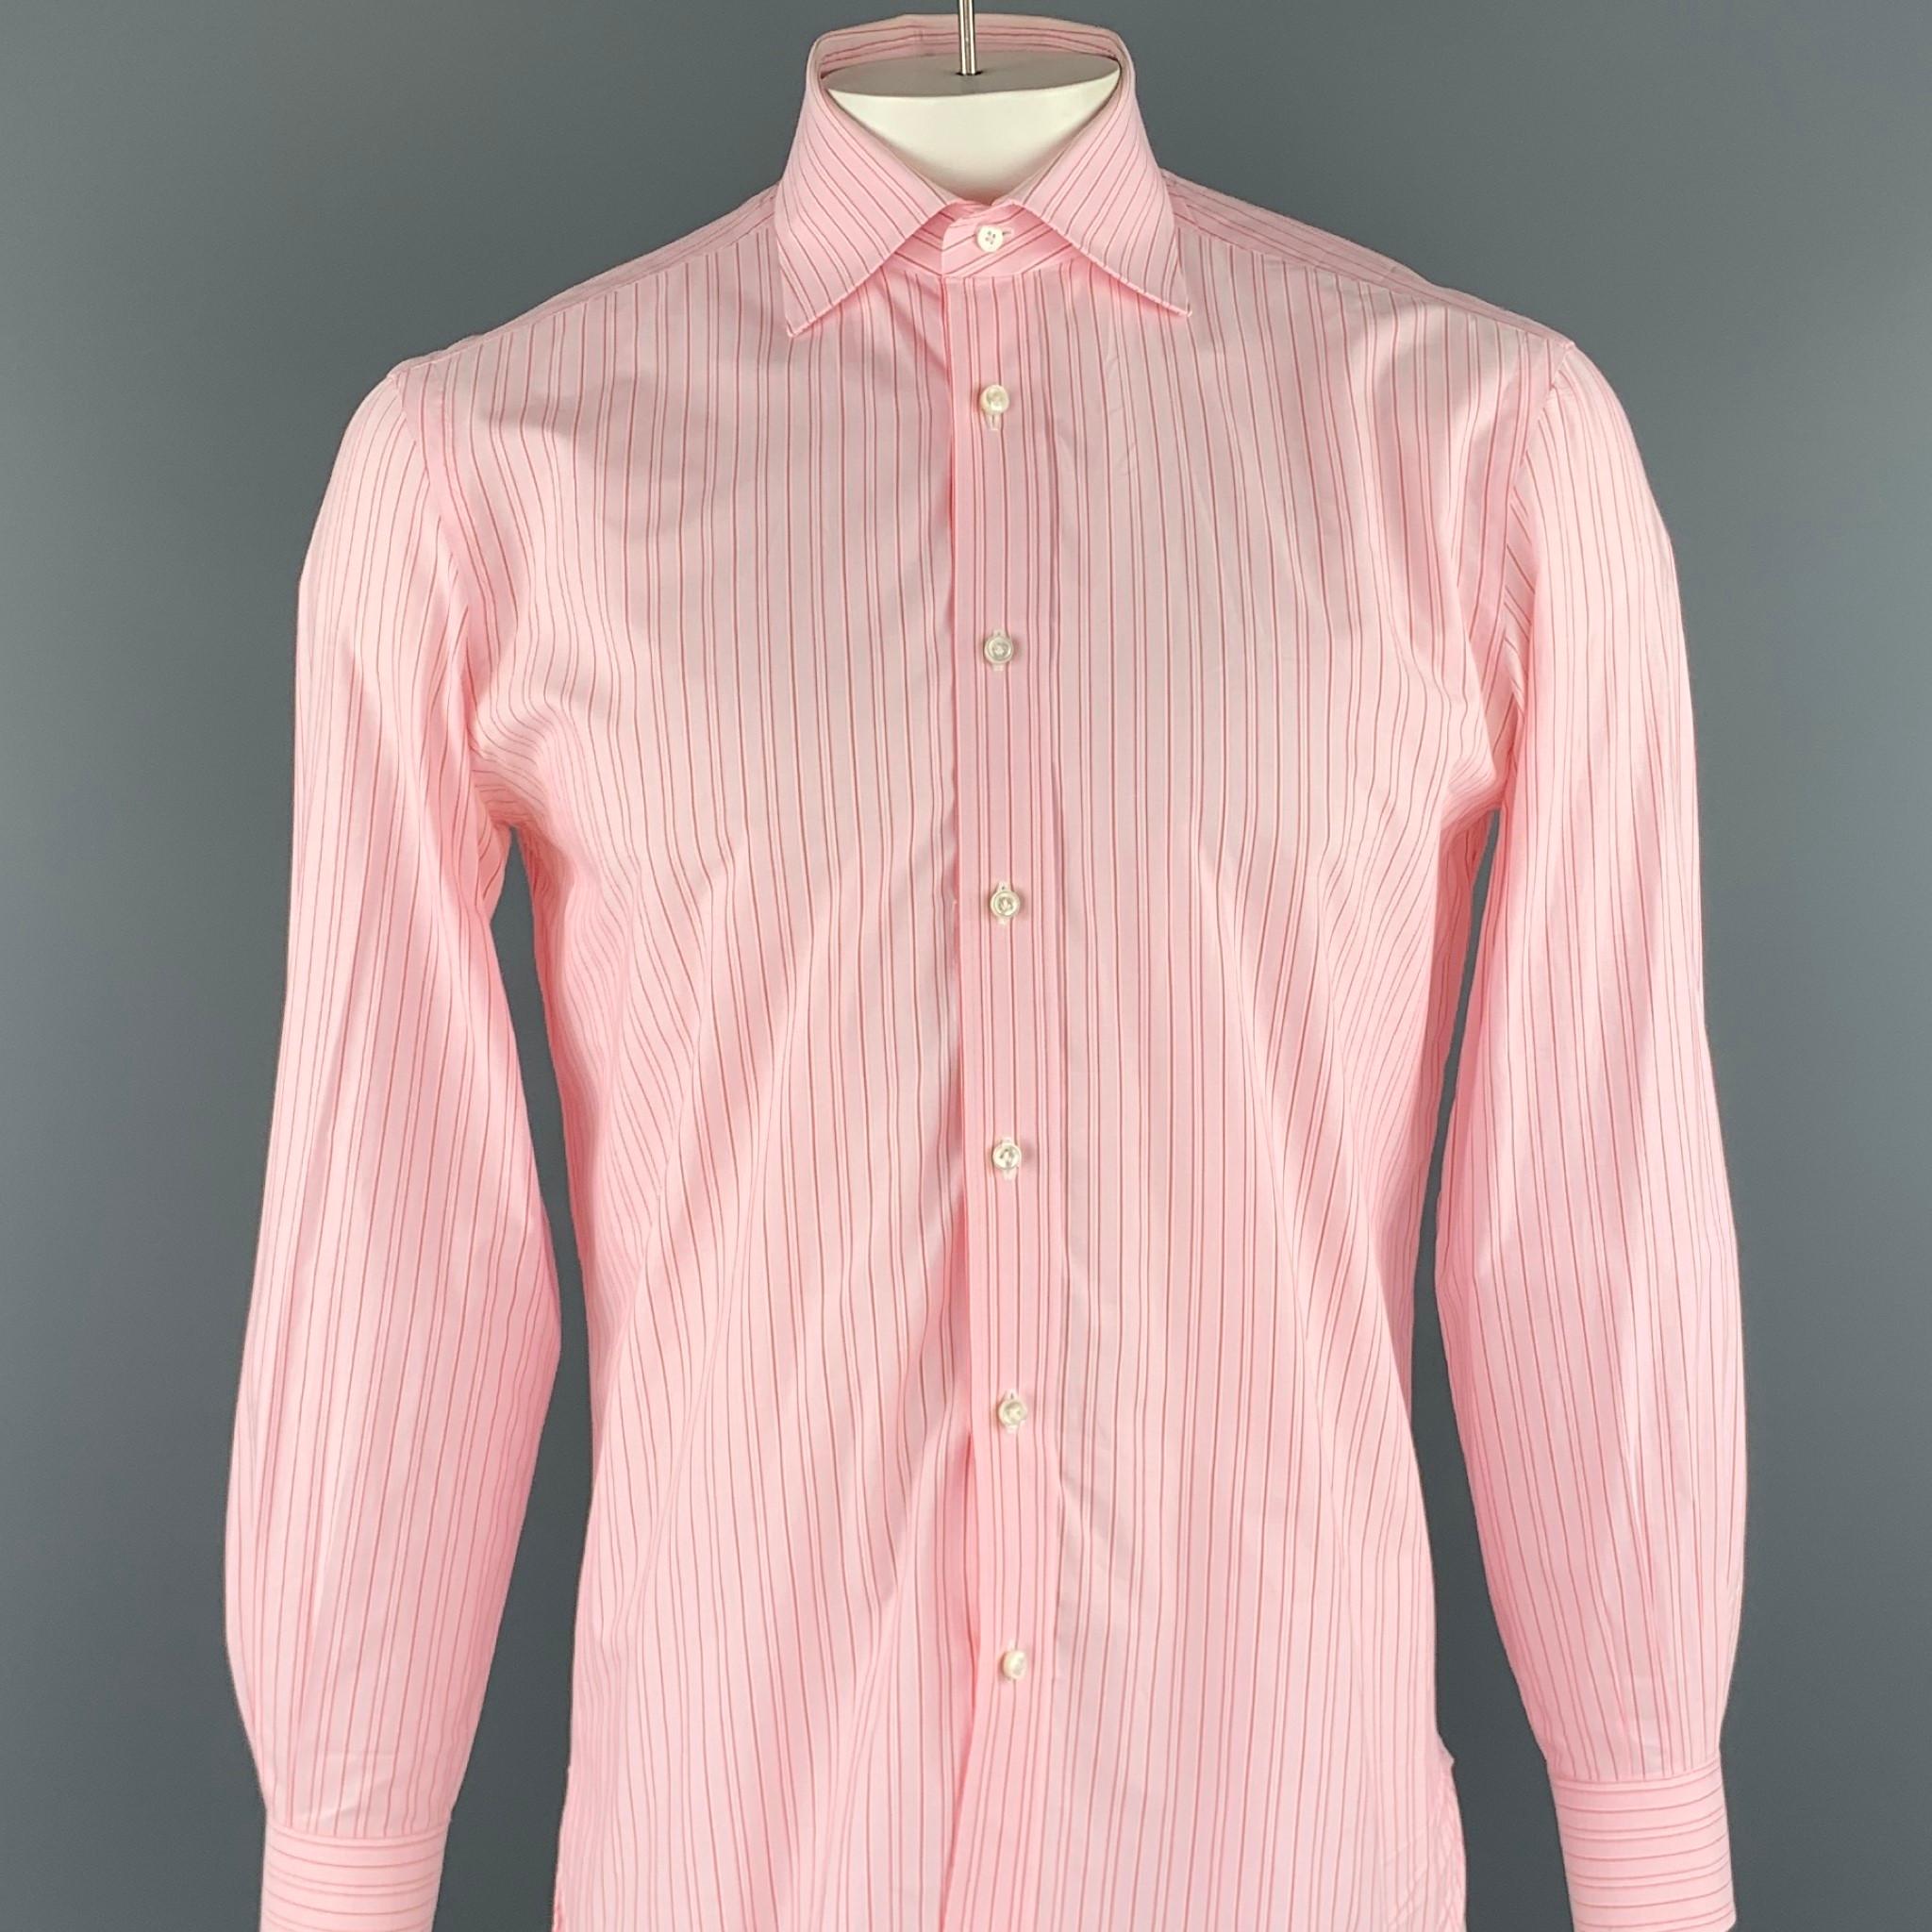 BORRELLI long sleeve shirt comes in a pink stripe cotton featuring a button up style and a spread collar. Made in Italy.

Excellent Pre-Owned Condition.
Marked: 40/15 

Measurements:

Shoulder: 18.5 in. 
Chest: 44 in. 
Sleeve: 25 in. 
Length: 31.5